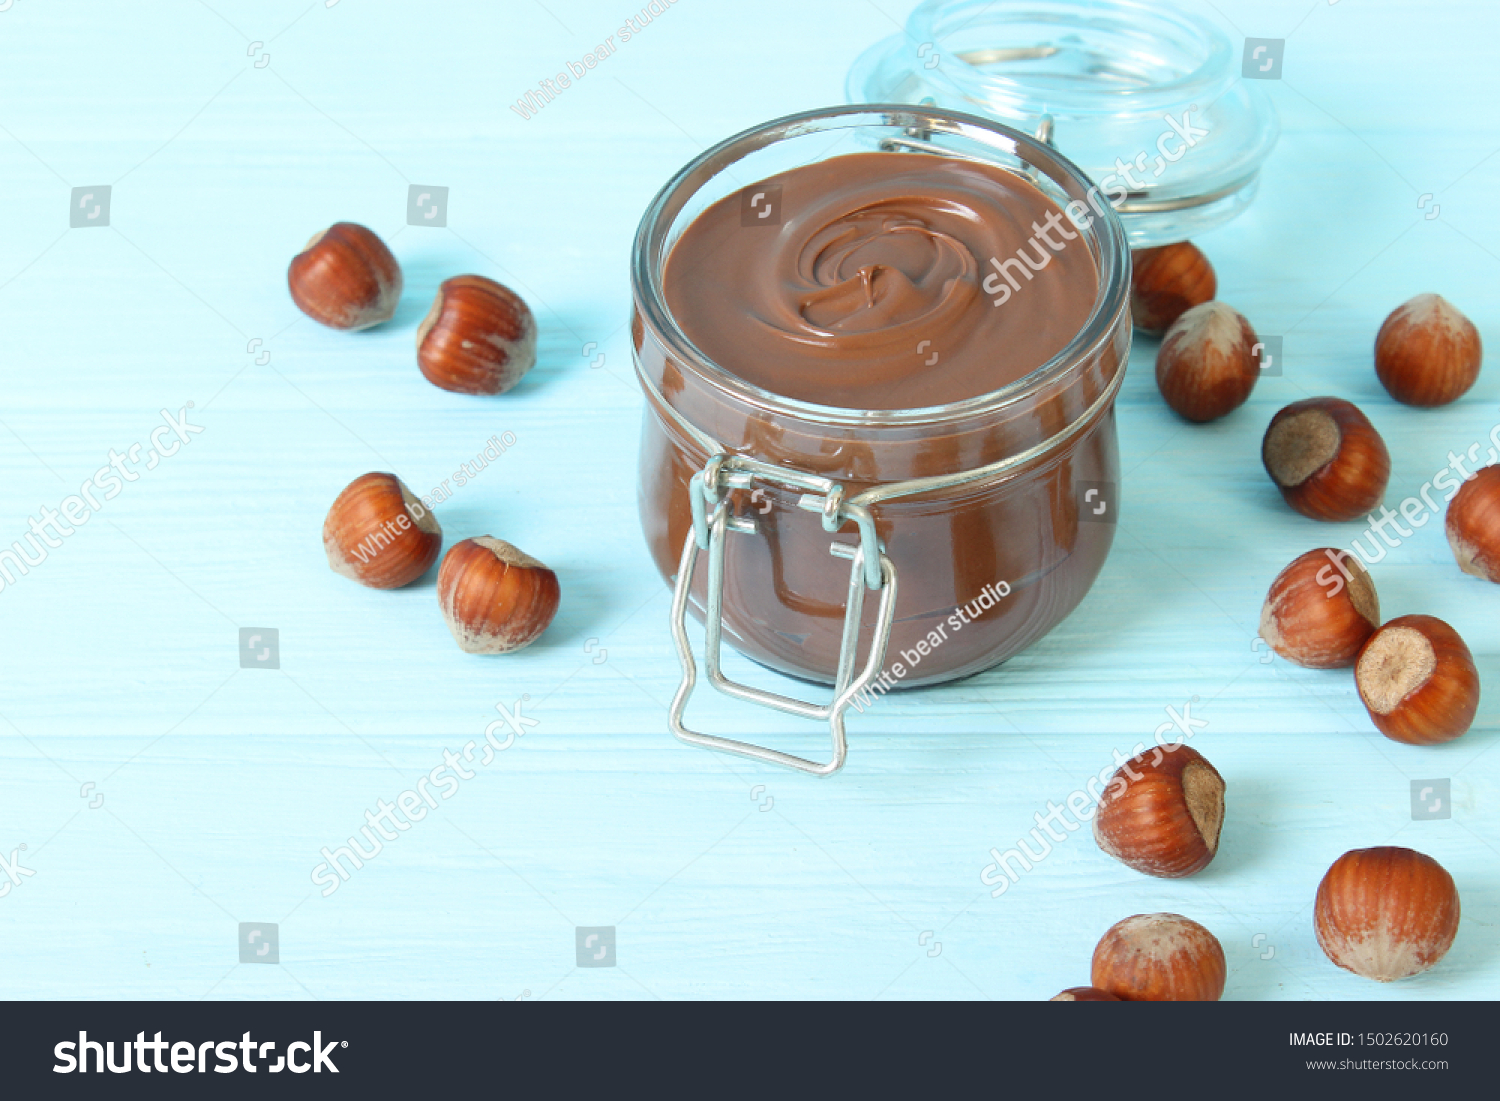 Download Chocolate Paste Glass Jar On Colored Royalty Free Stock Image Yellowimages Mockups